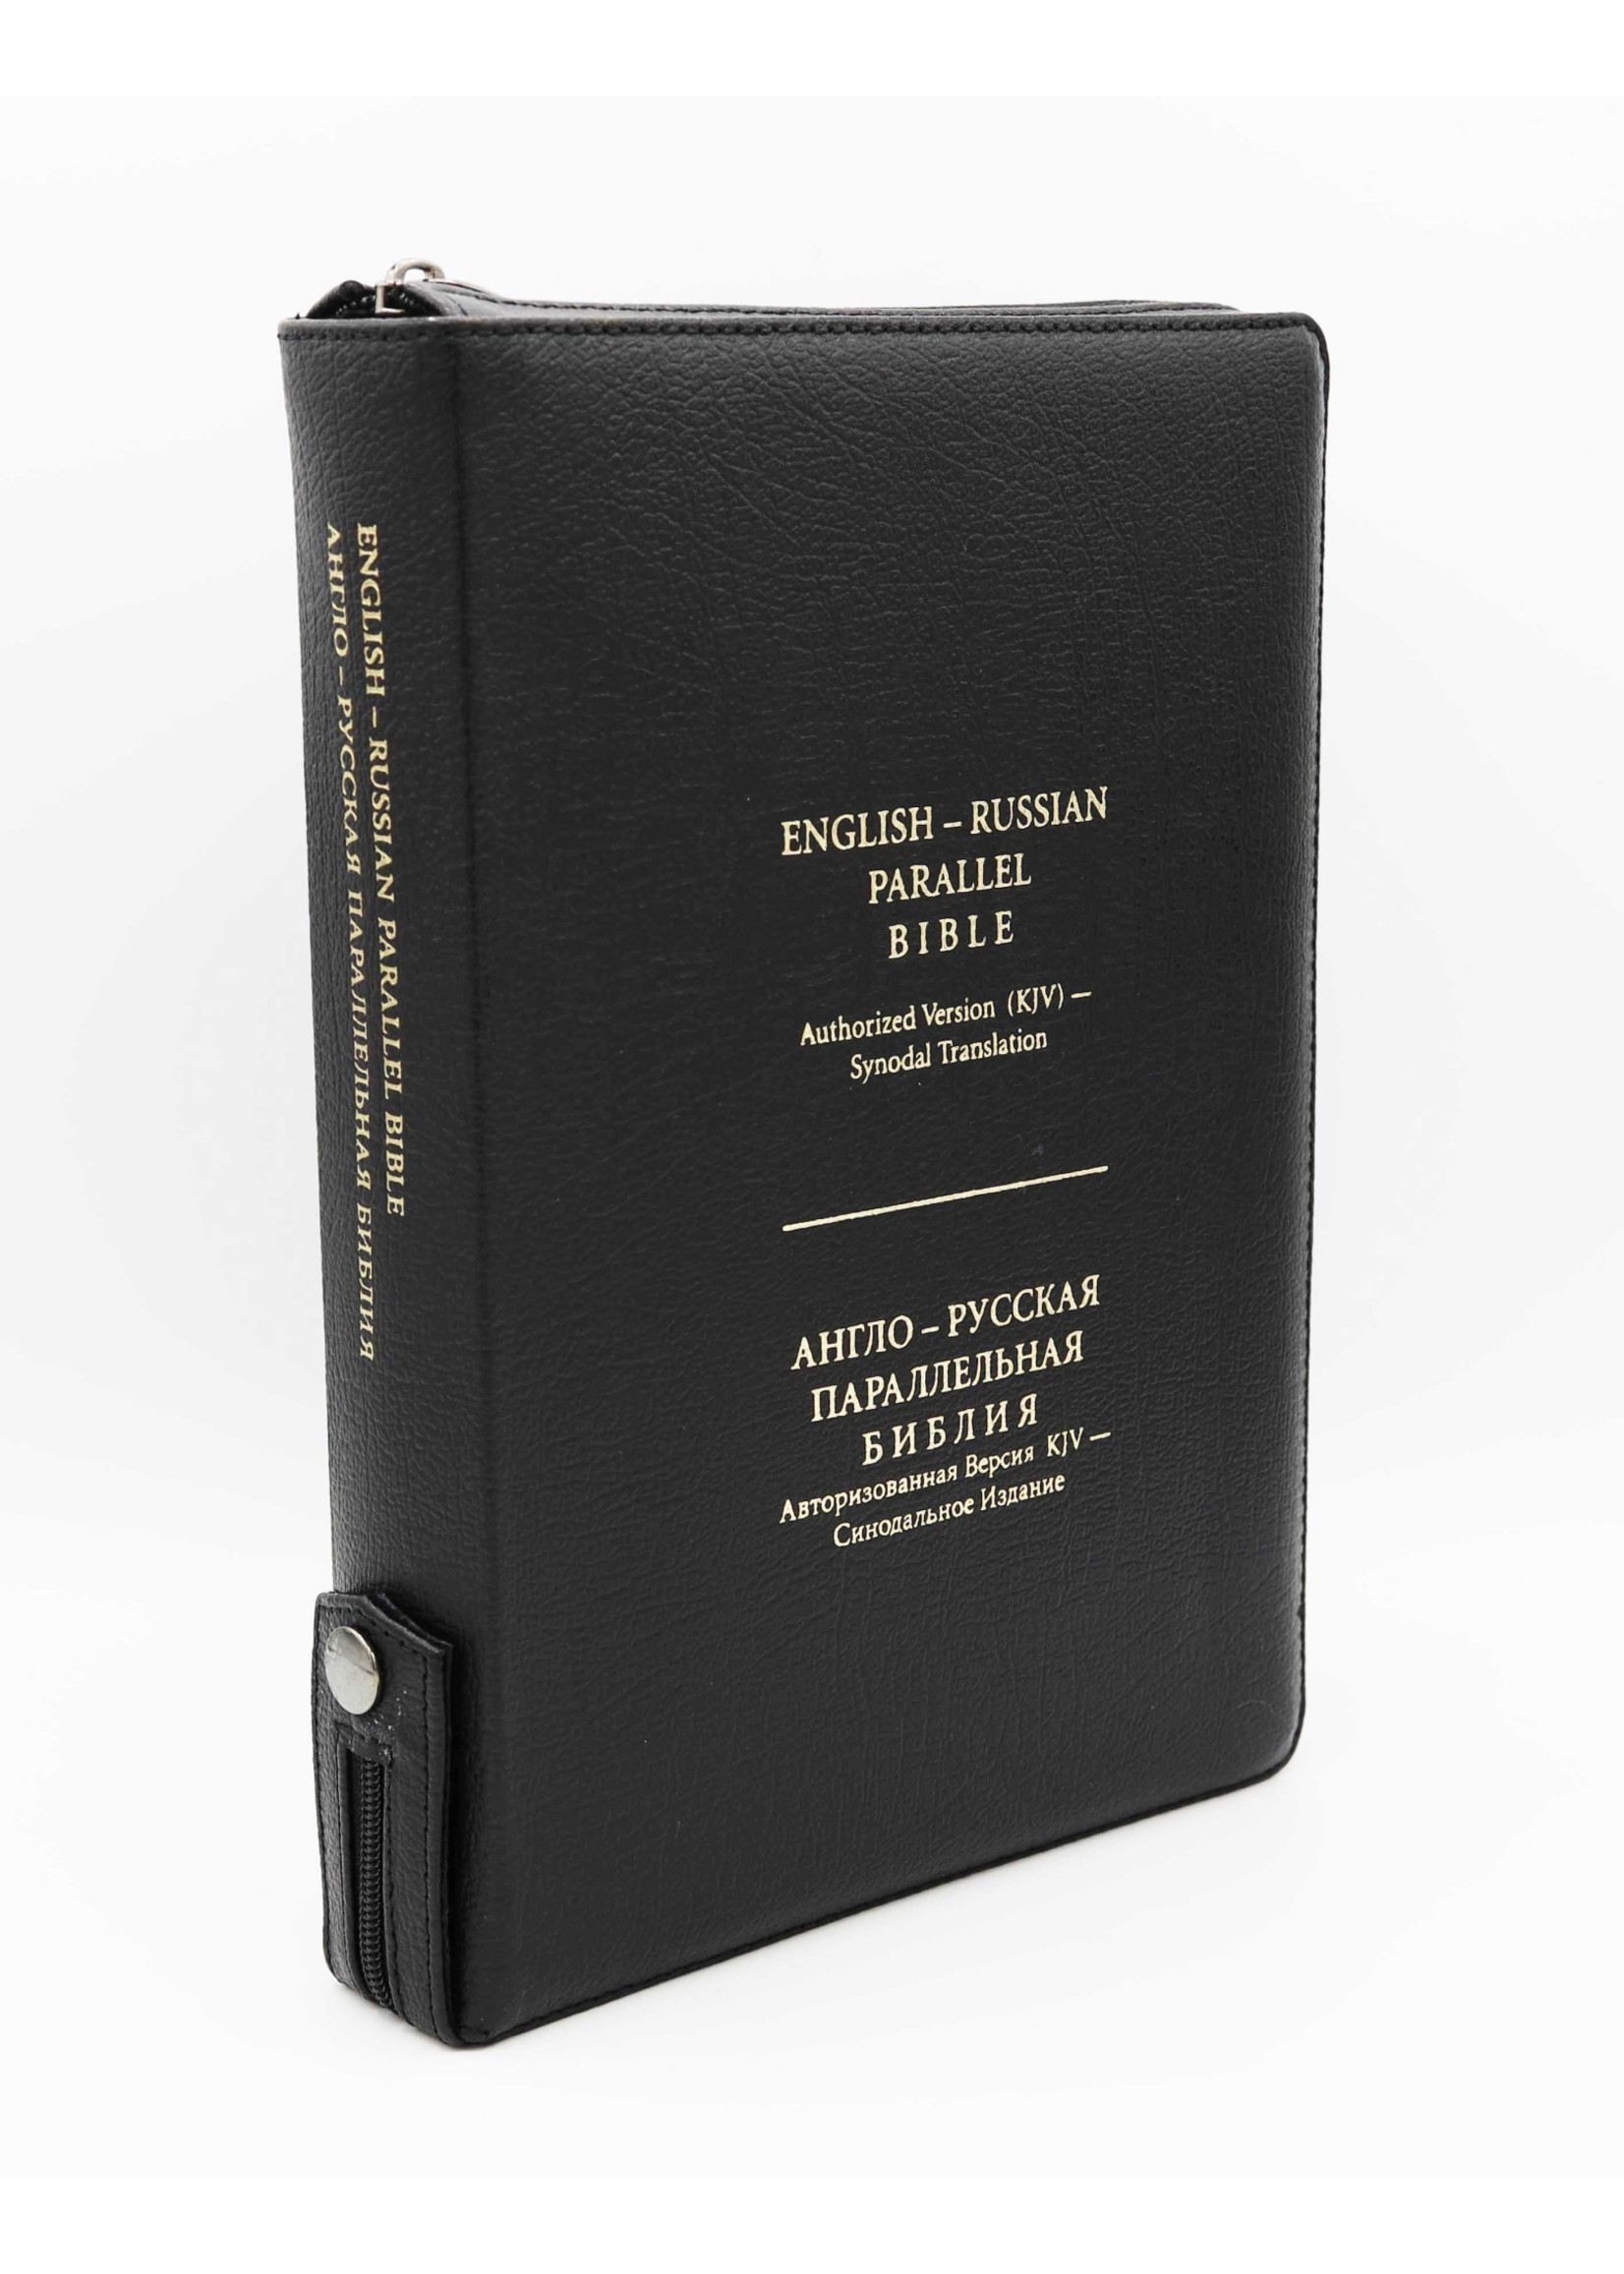 English-Russian Parallel Bible (KJV-SYNO), Index, Zipper, Large, Genuine Leather Black